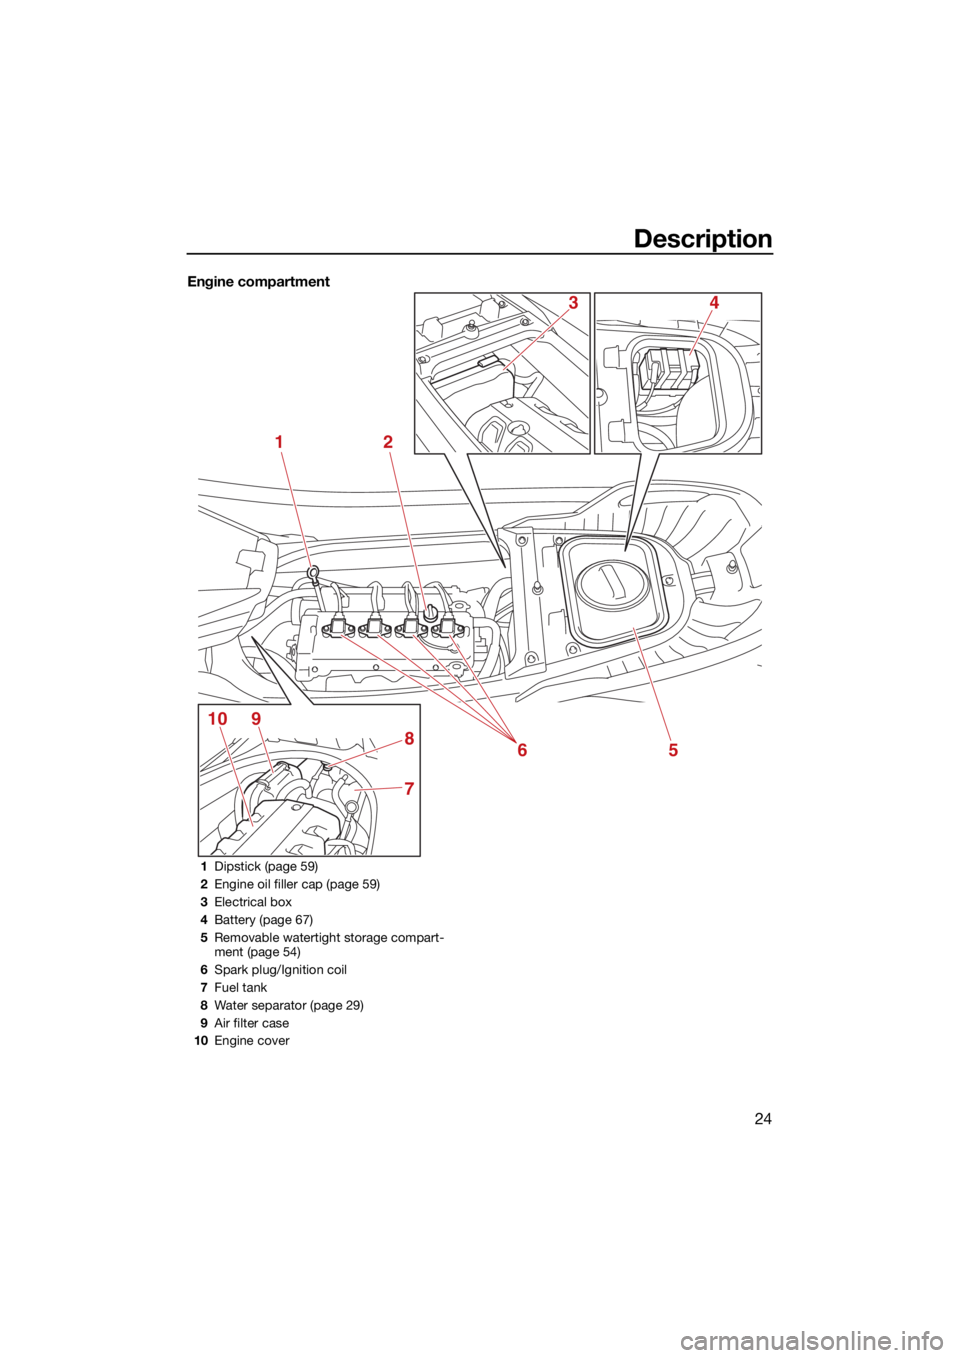 YAMAHA FX HO CRUISER 2021 Owners Guide Description
24
Engine compartment
12
5
7
8
9106
43
1Dipstick (page 59)
2 Engine oil filler cap (page 59)
3 Electrical box
4 Battery (page 67)
5 Removable watertight storage compart-
ment (page 54)
6 S